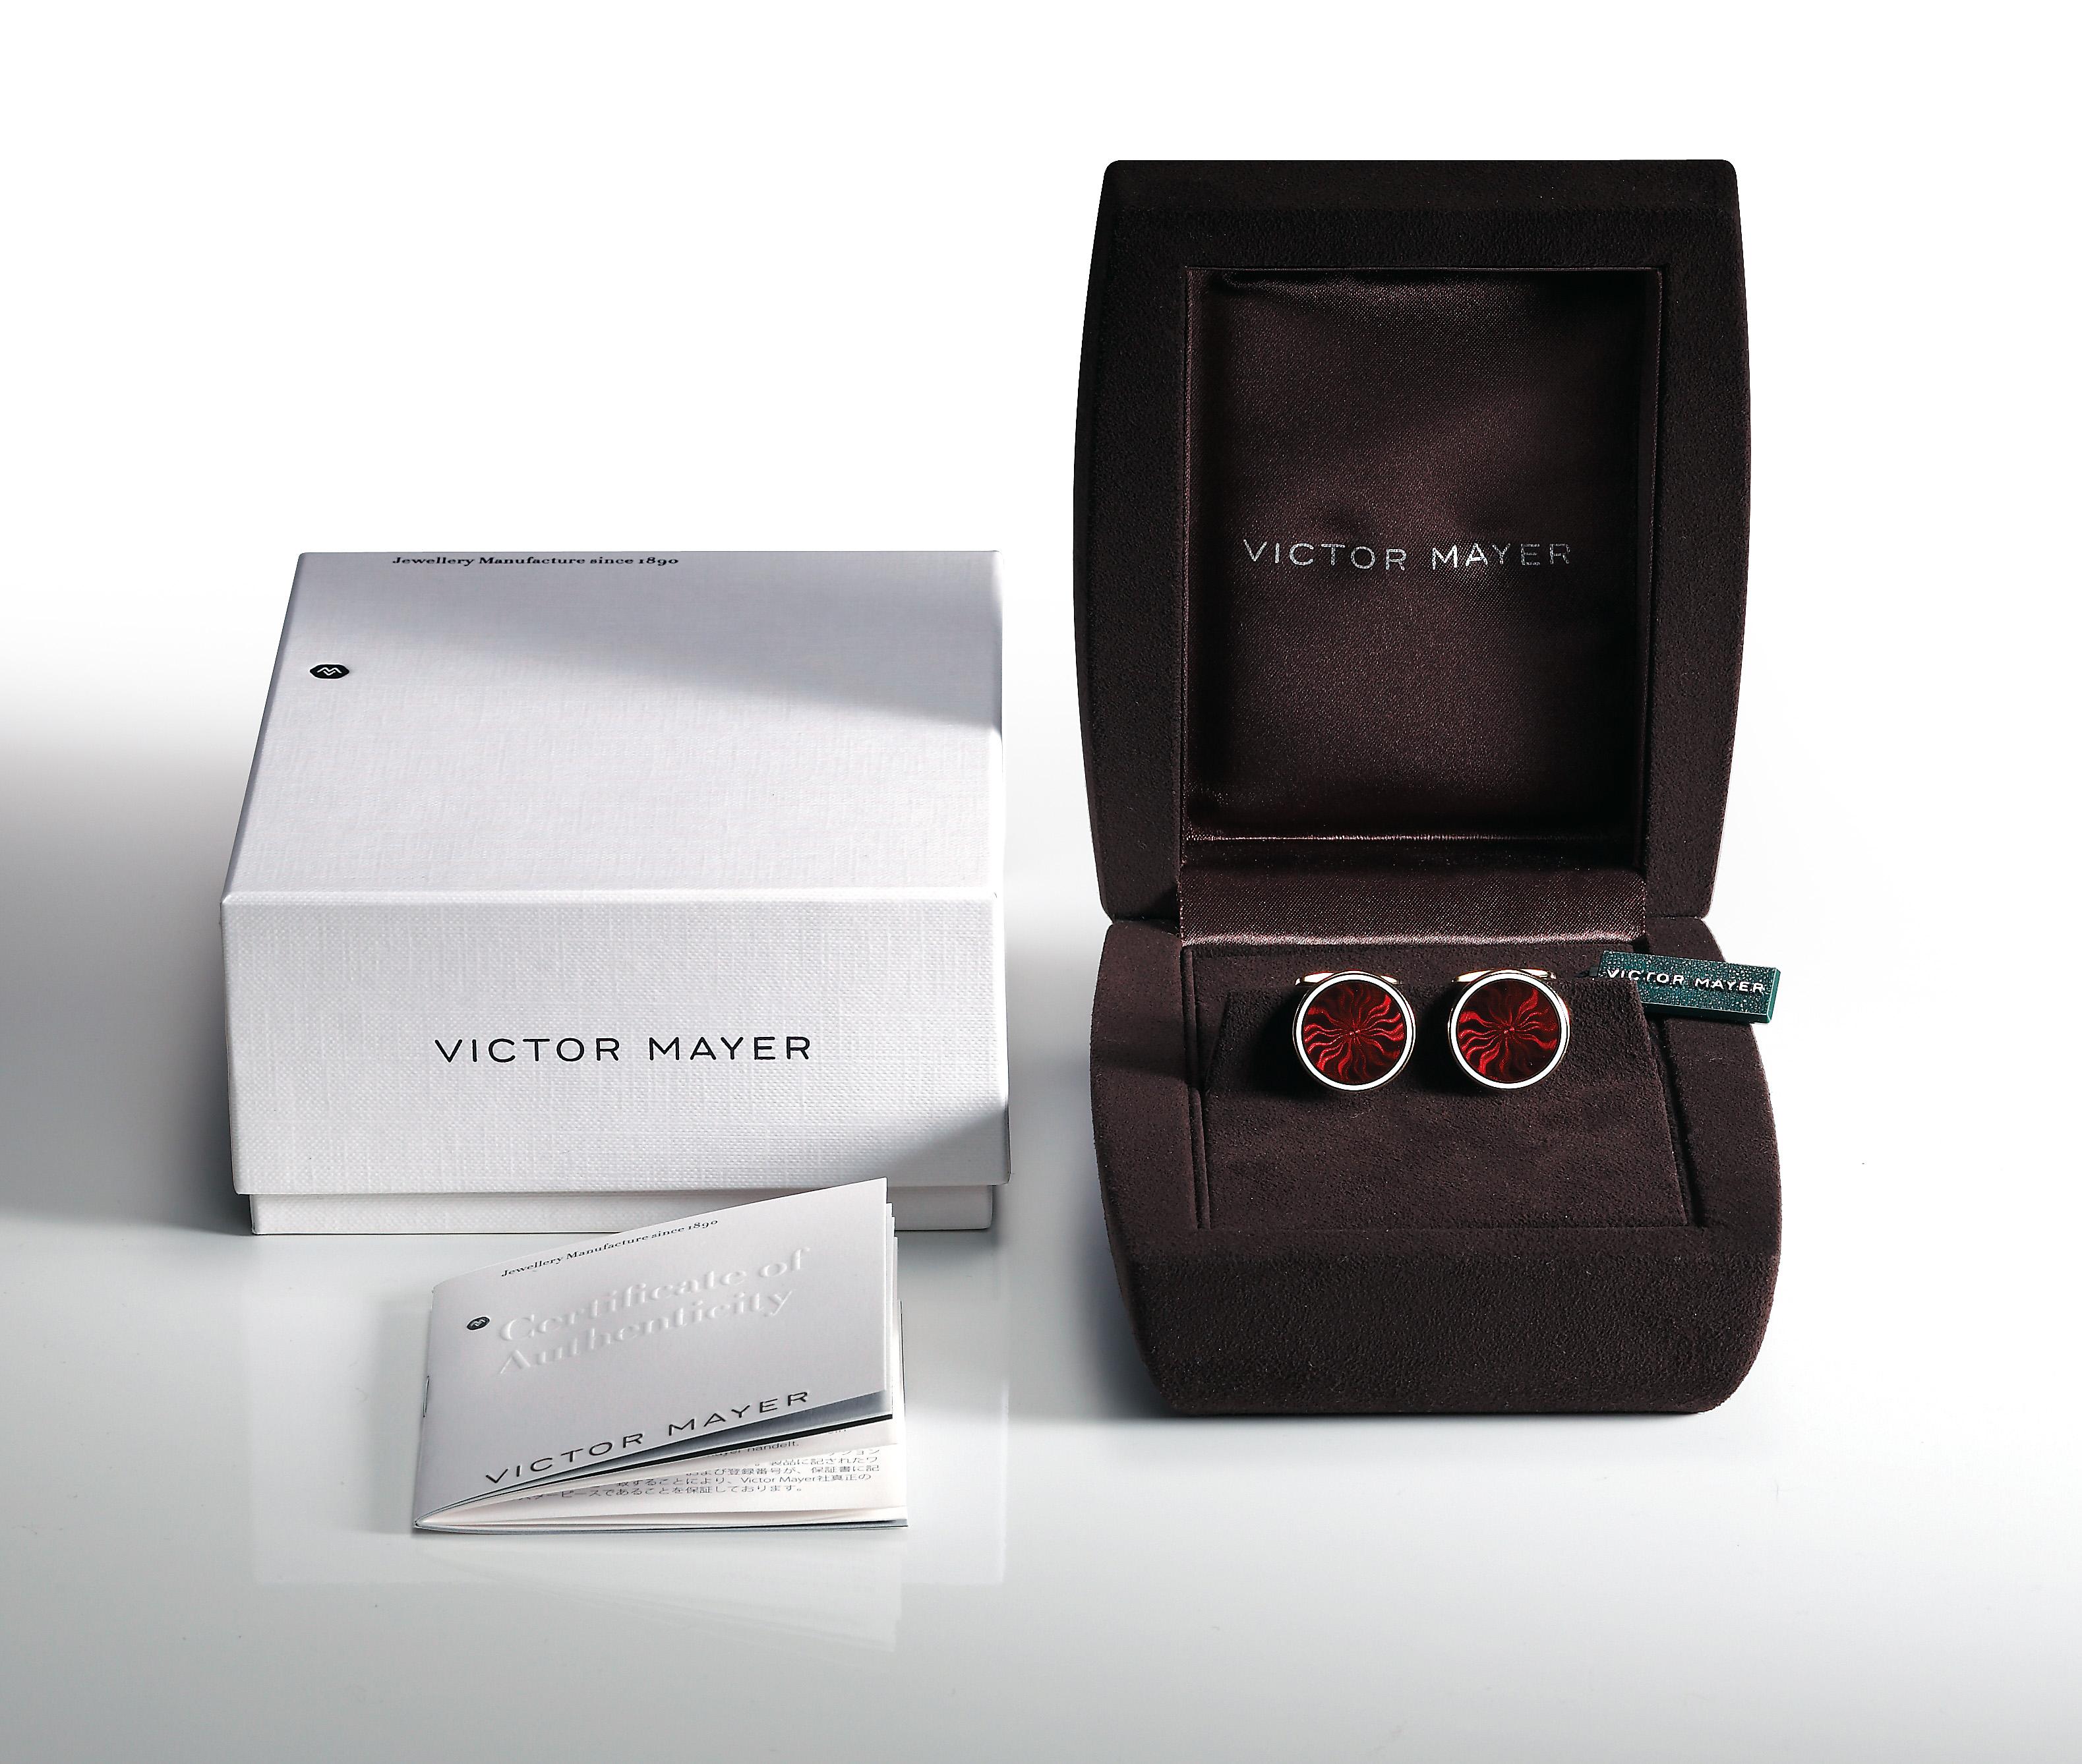 Art Deco 17.5 mm cufflinks in rose gold with diamonds and ruby

VICTOR MAYER is a fine jewelry house known for its sophisticated craftsmanship. Since 1989, the company has been closely associated with the Fabergé name as a workmaster. The company